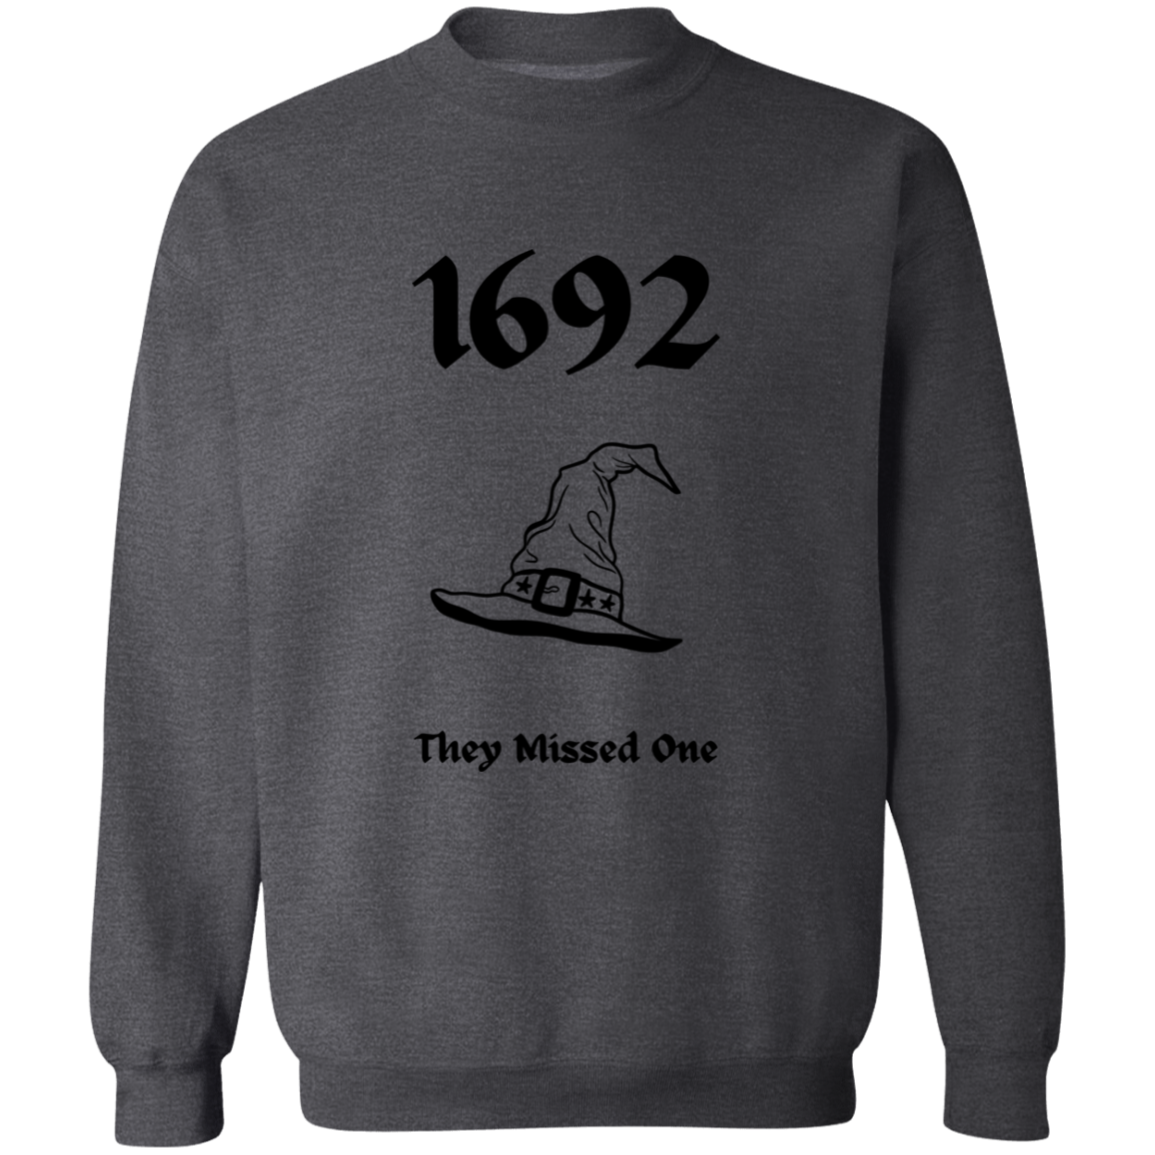 Get trendy with 1692 Crewneck Pullover Sweatshirt - Sweatshirts available at Good Gift Company. Grab yours for $39.95 today!